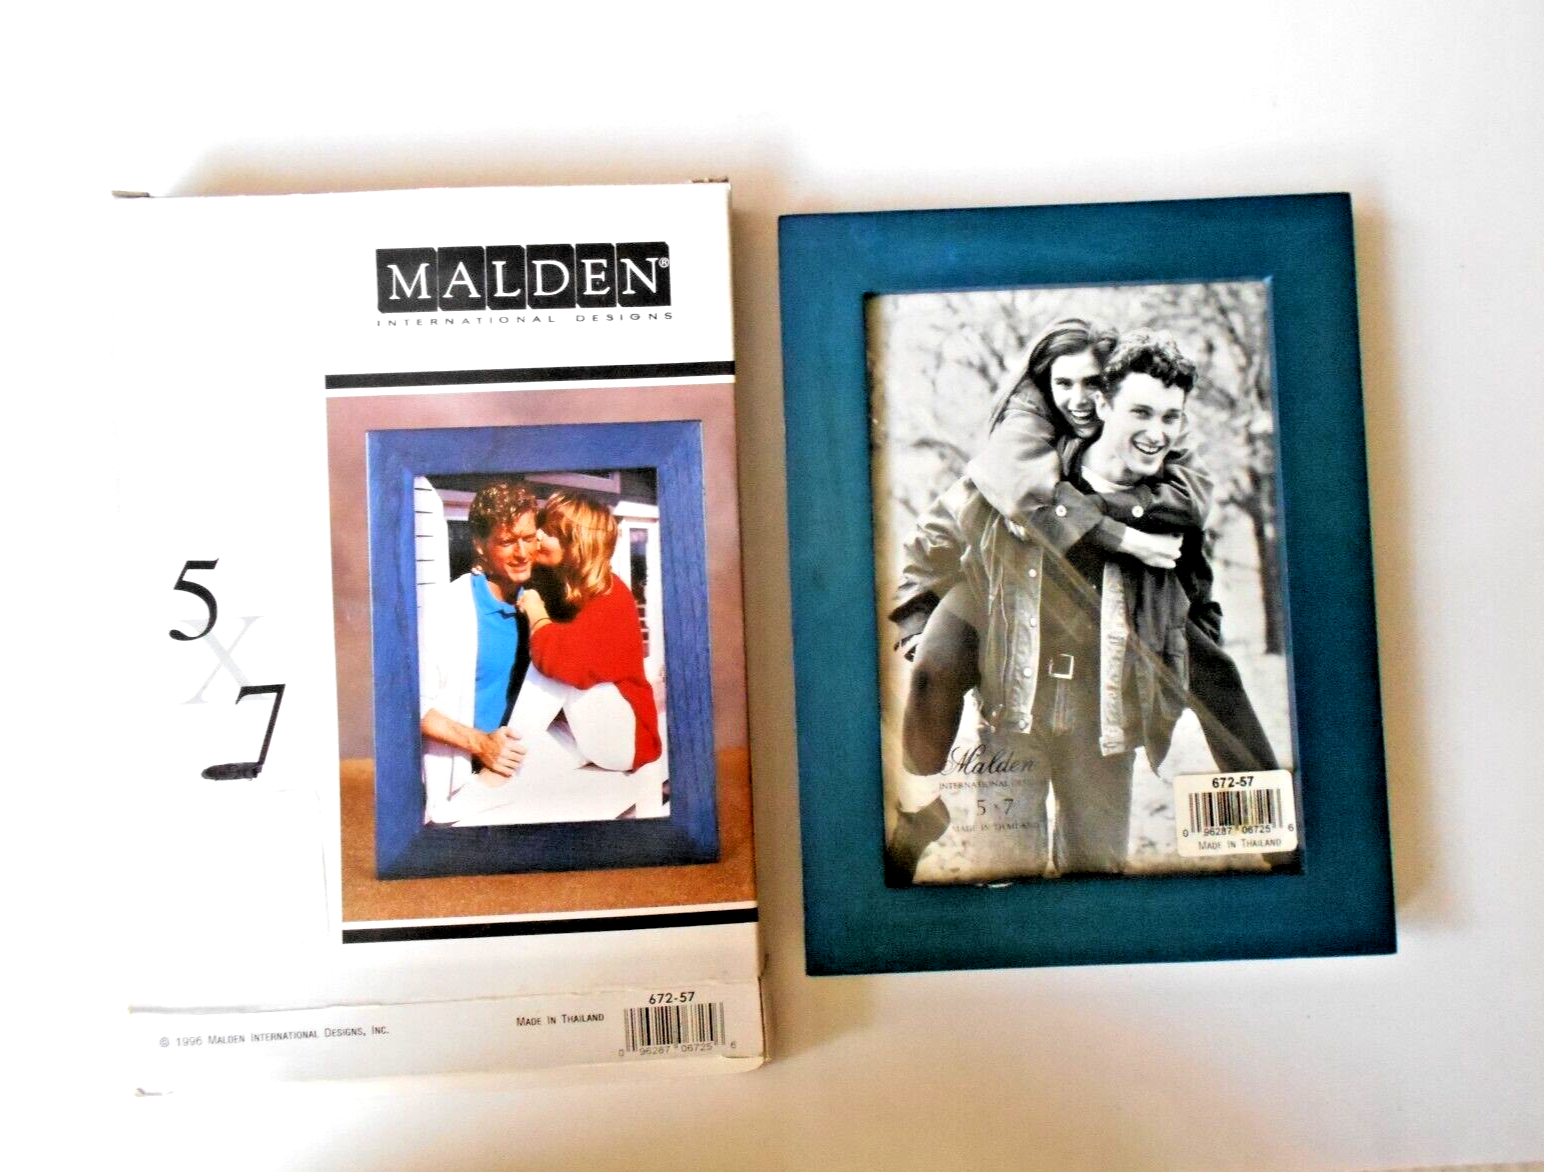 Primary image for Malden International Wood 5" x 7" Blue Picture Frame #672-57